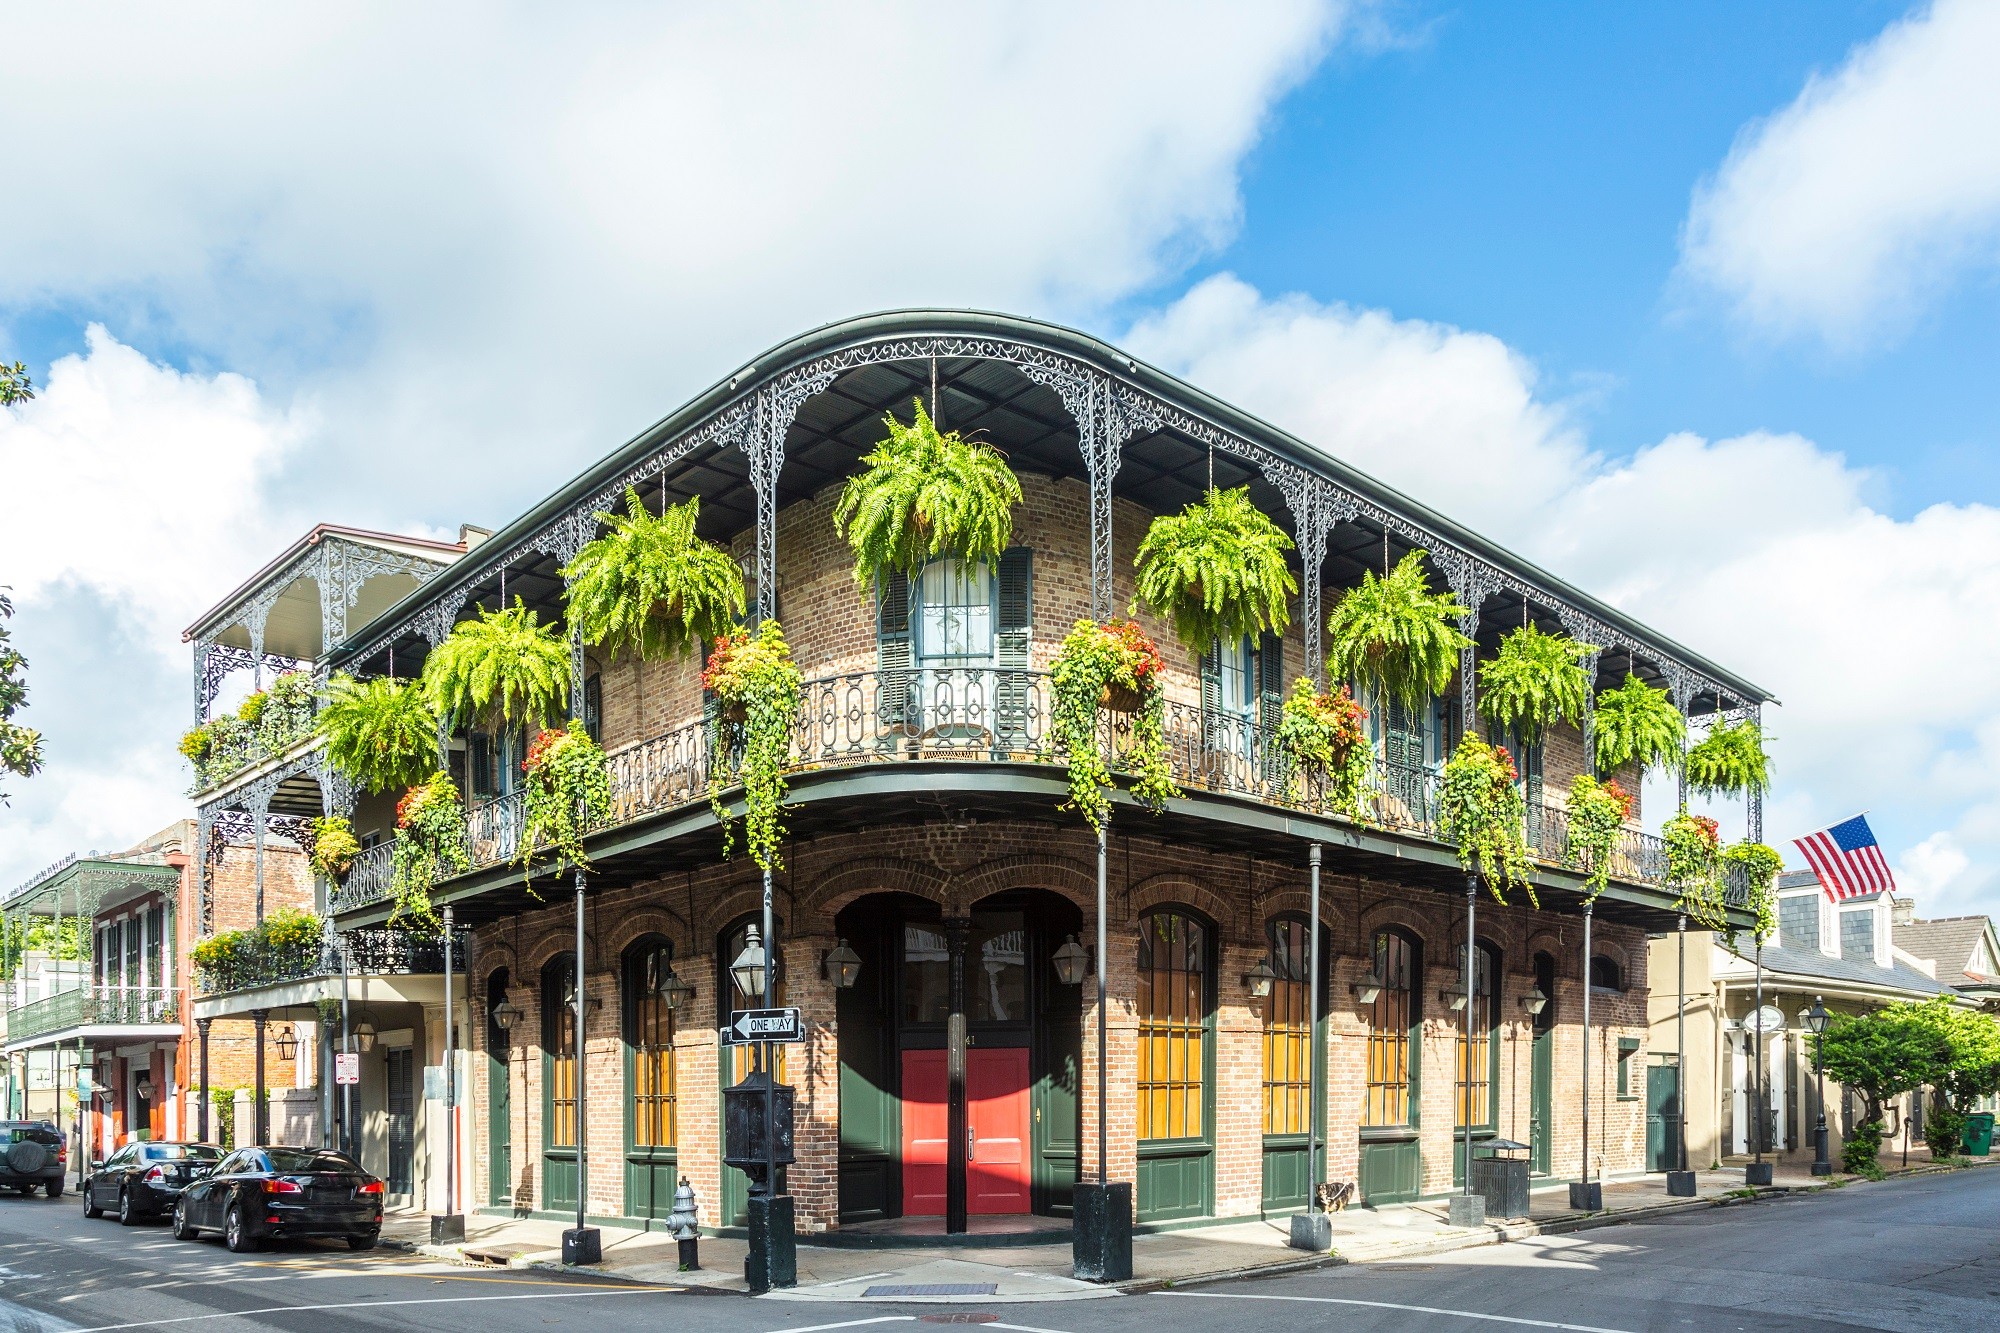 historic building of new orleans la, corner shot of building with hanging plants